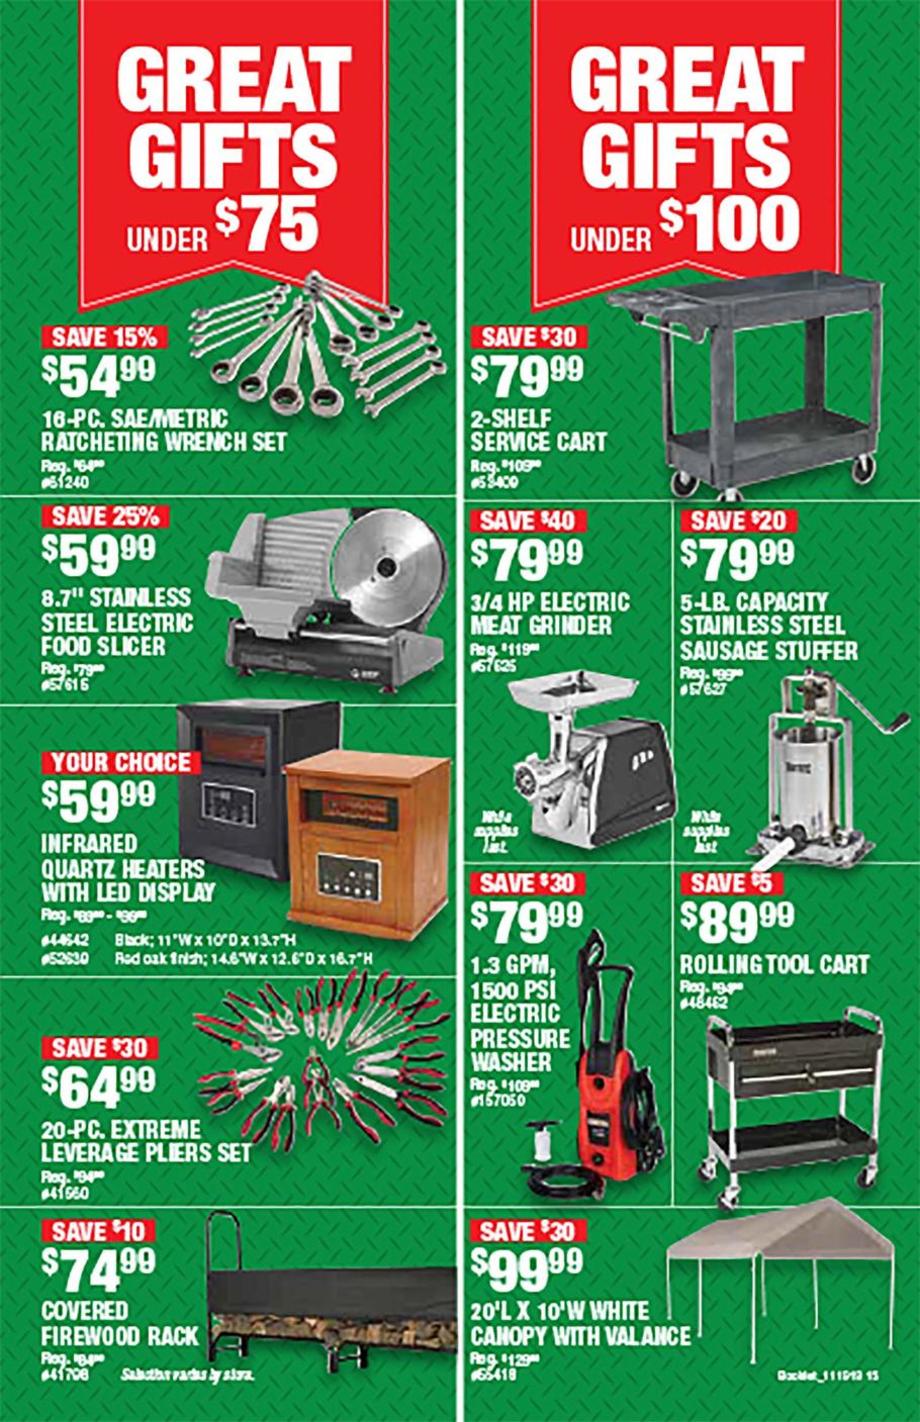 Northern Tool Black Friday Ads, Sales, Deals, Doorbusters 2019 CouponShy